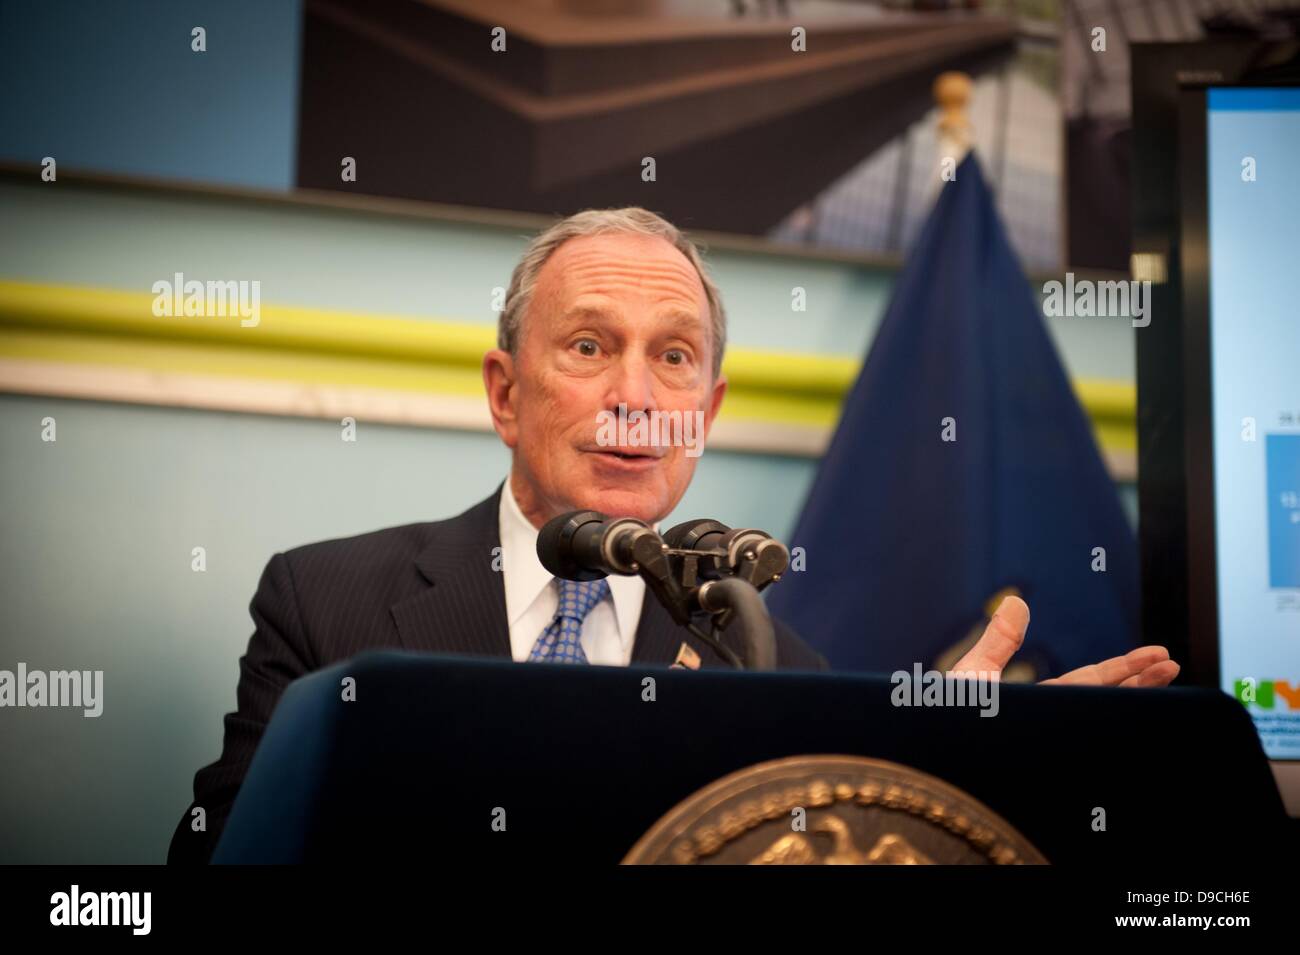 Manhattan, New York, USA. 17th June, 2013. Mayor MICHAEL BLOOMBERG announces that New York City's graduation rate held steady at 64.7 percent as students met new graduation requirements, Tweed Courthouse, Monday, June 17, 2013. Credit: Credit:  Bryan Smith/ZUMAPRESS.com/Alamy Live News Stock Photo